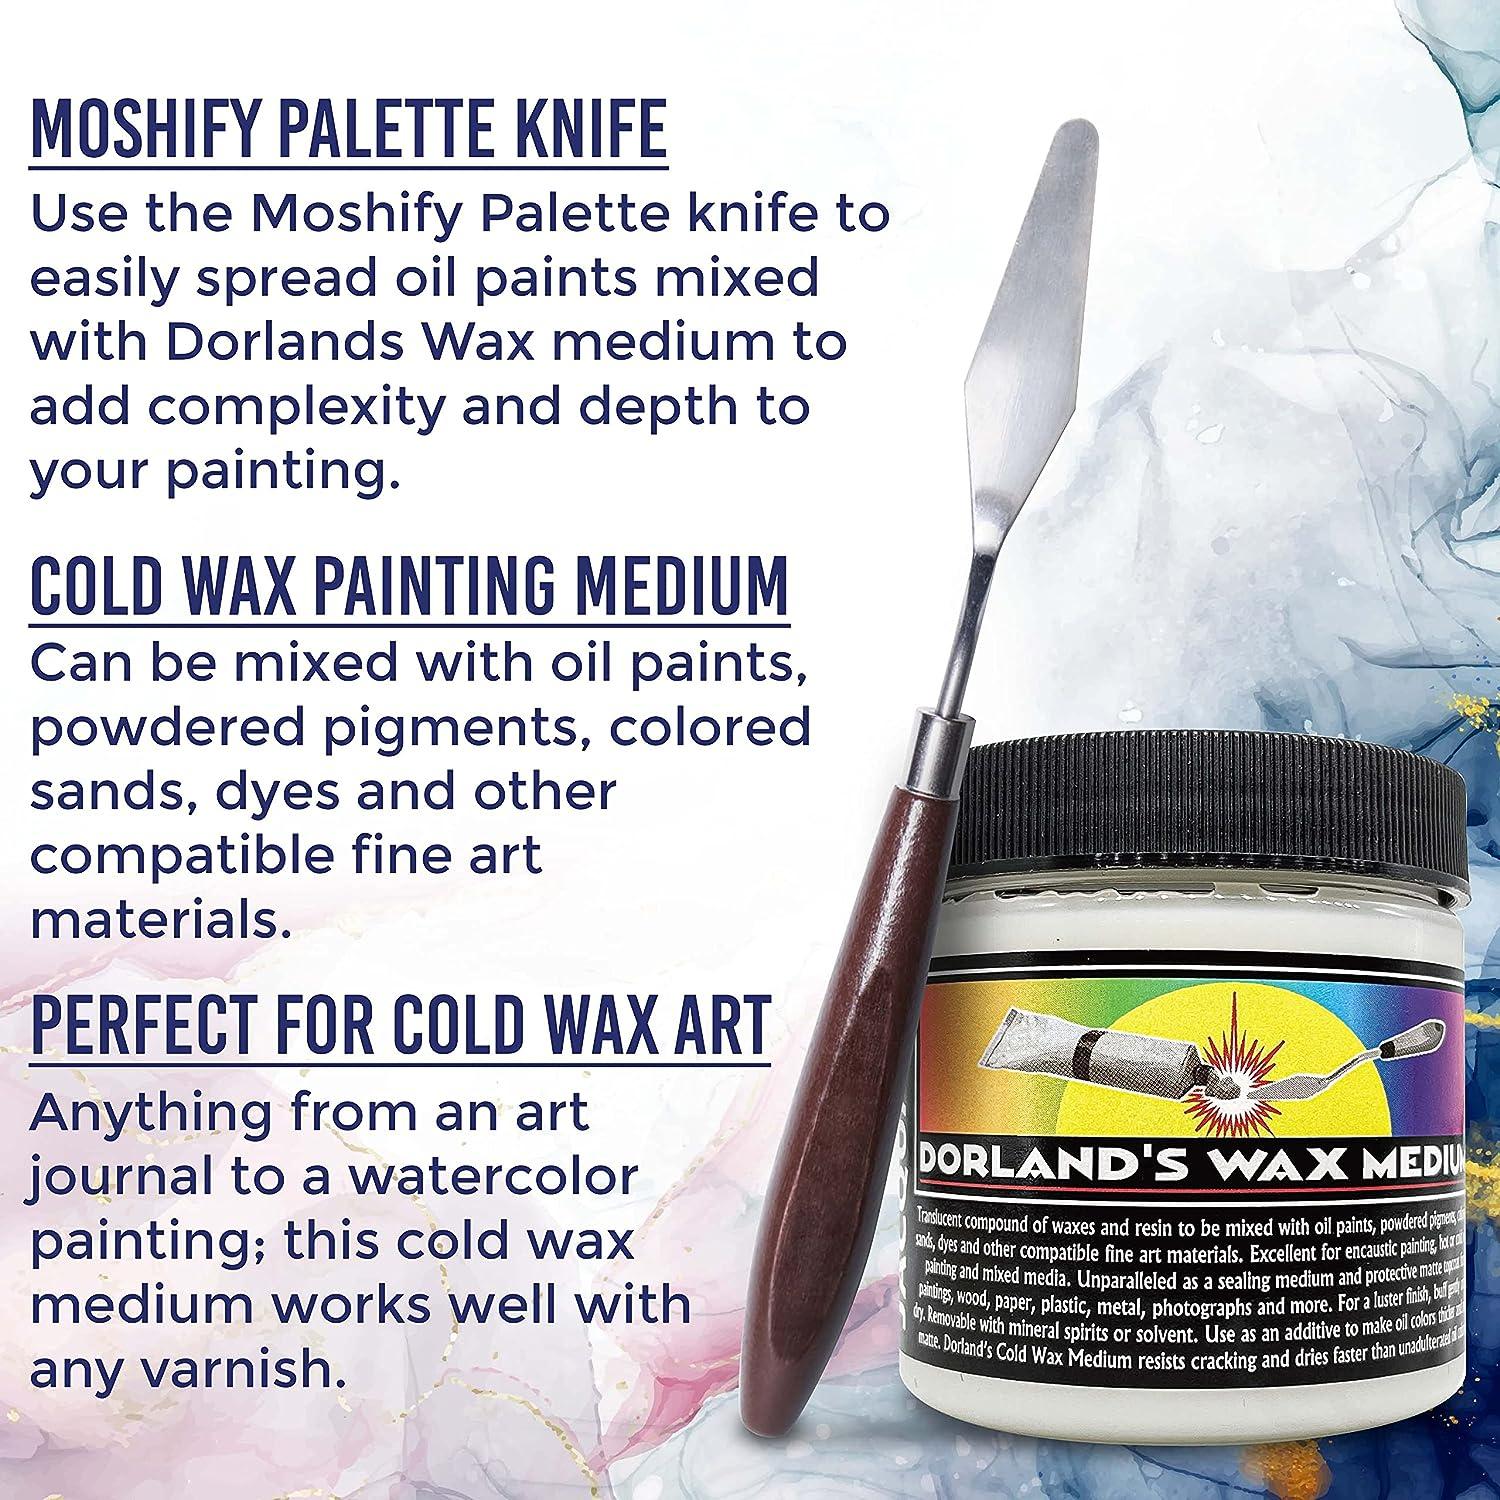 Jacquard Dorlands Wax 4fl oz - Cold Wax Medium Made in USA - Oil Painting -  Watercolor Sealer - Bundled with Moshify Palette Knife